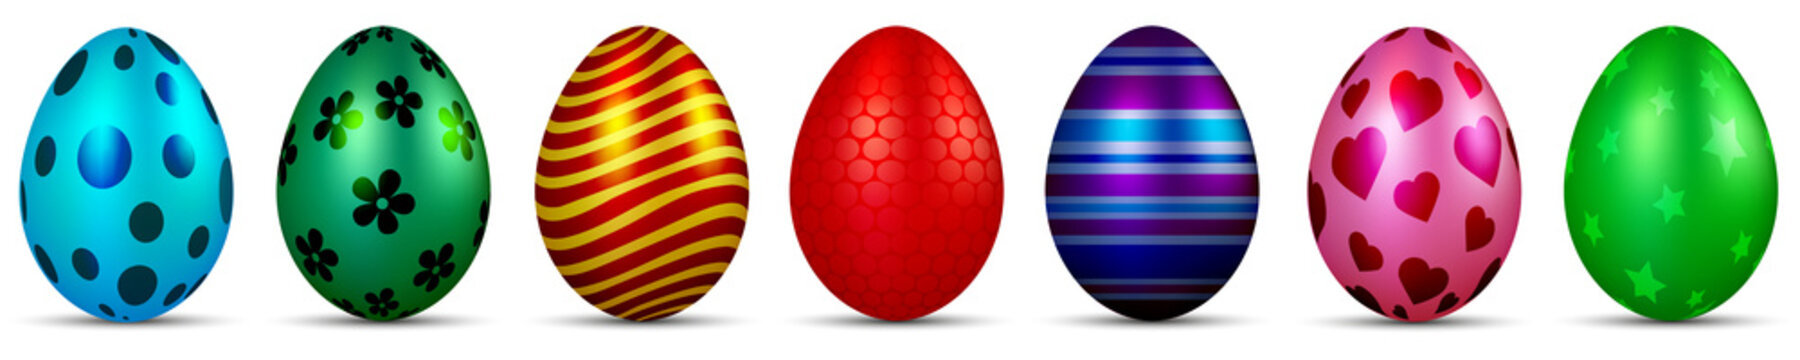 Shiny painted Easter eggs